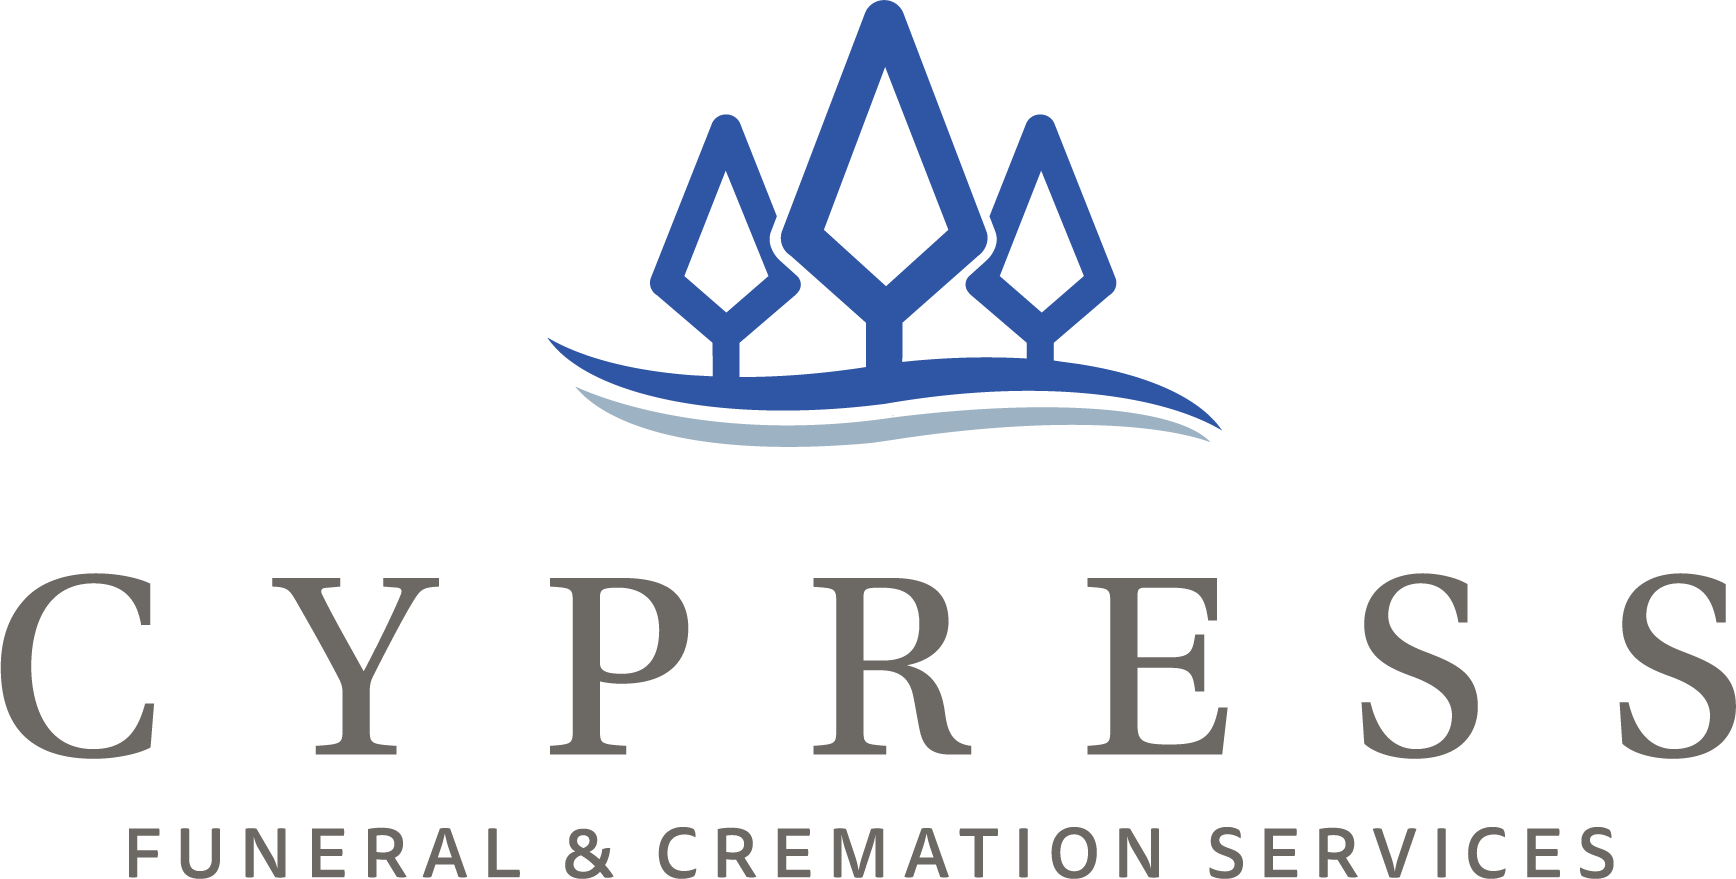 Alternatives Funeral & Cremation Services